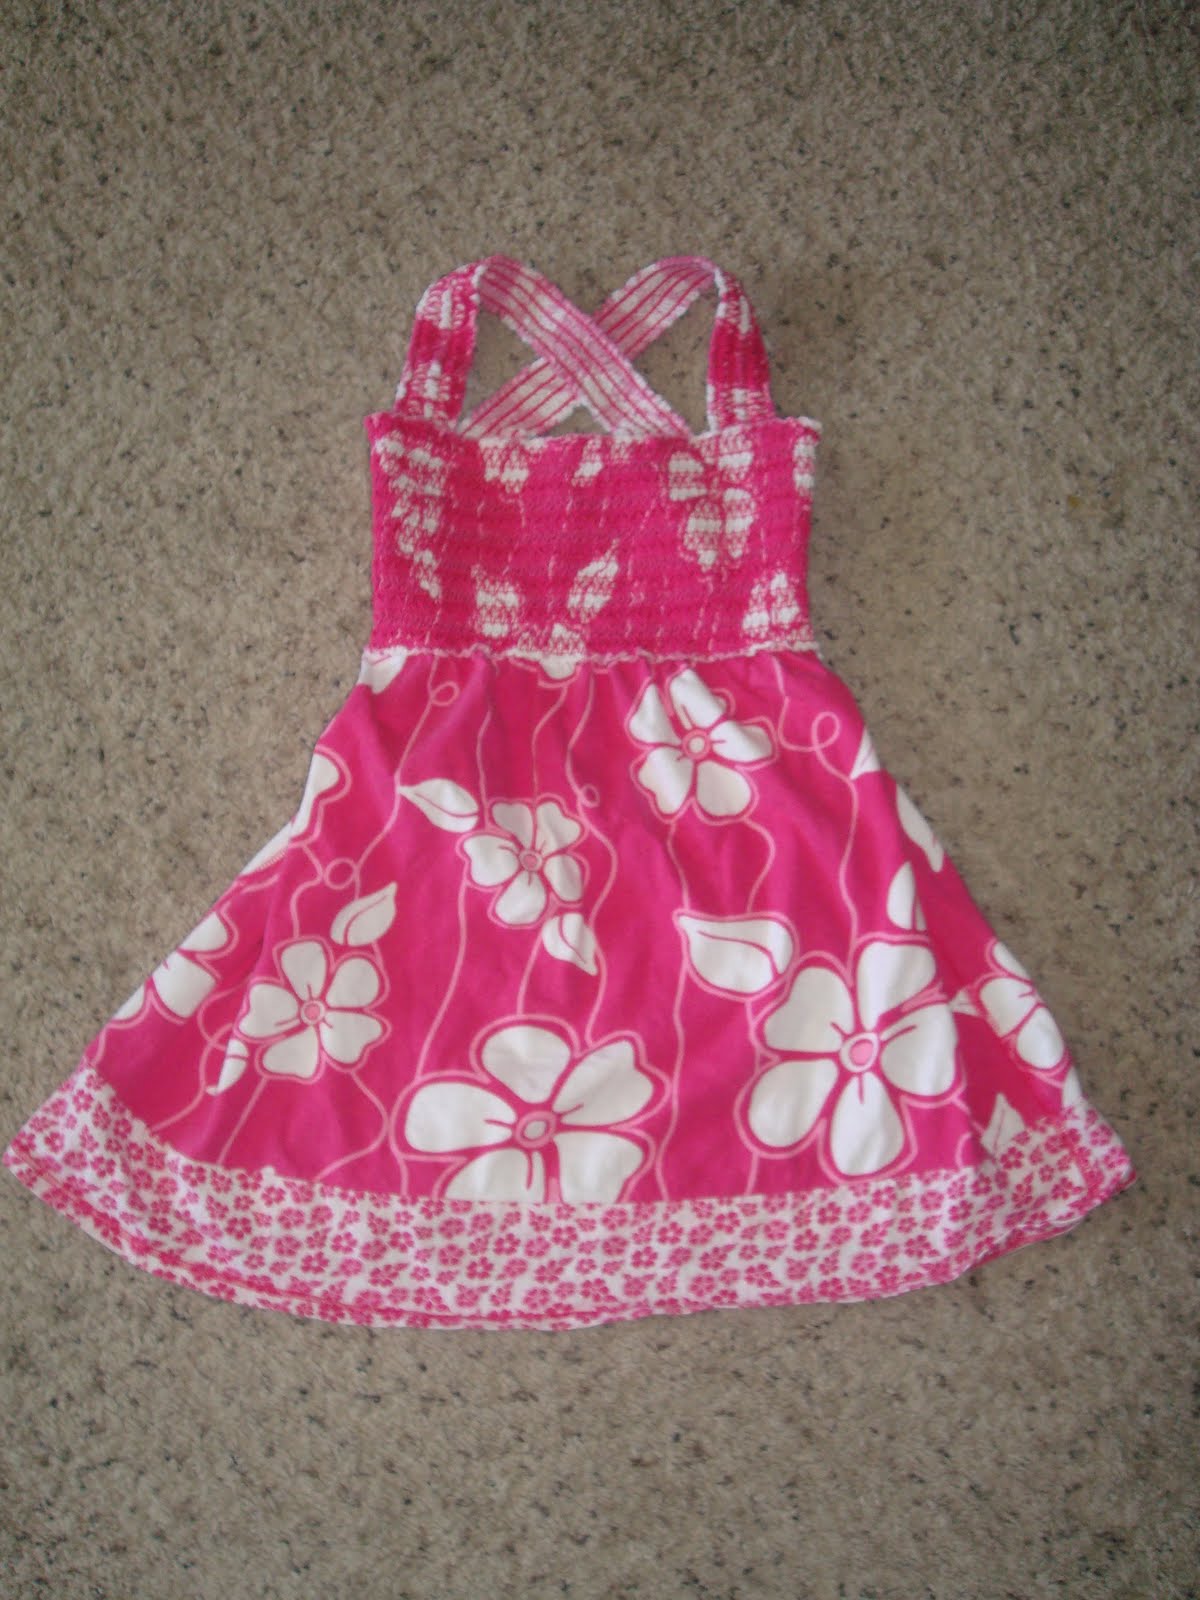 Create my Bliss: one Old Shirt becomes one Toddler Sun Dress